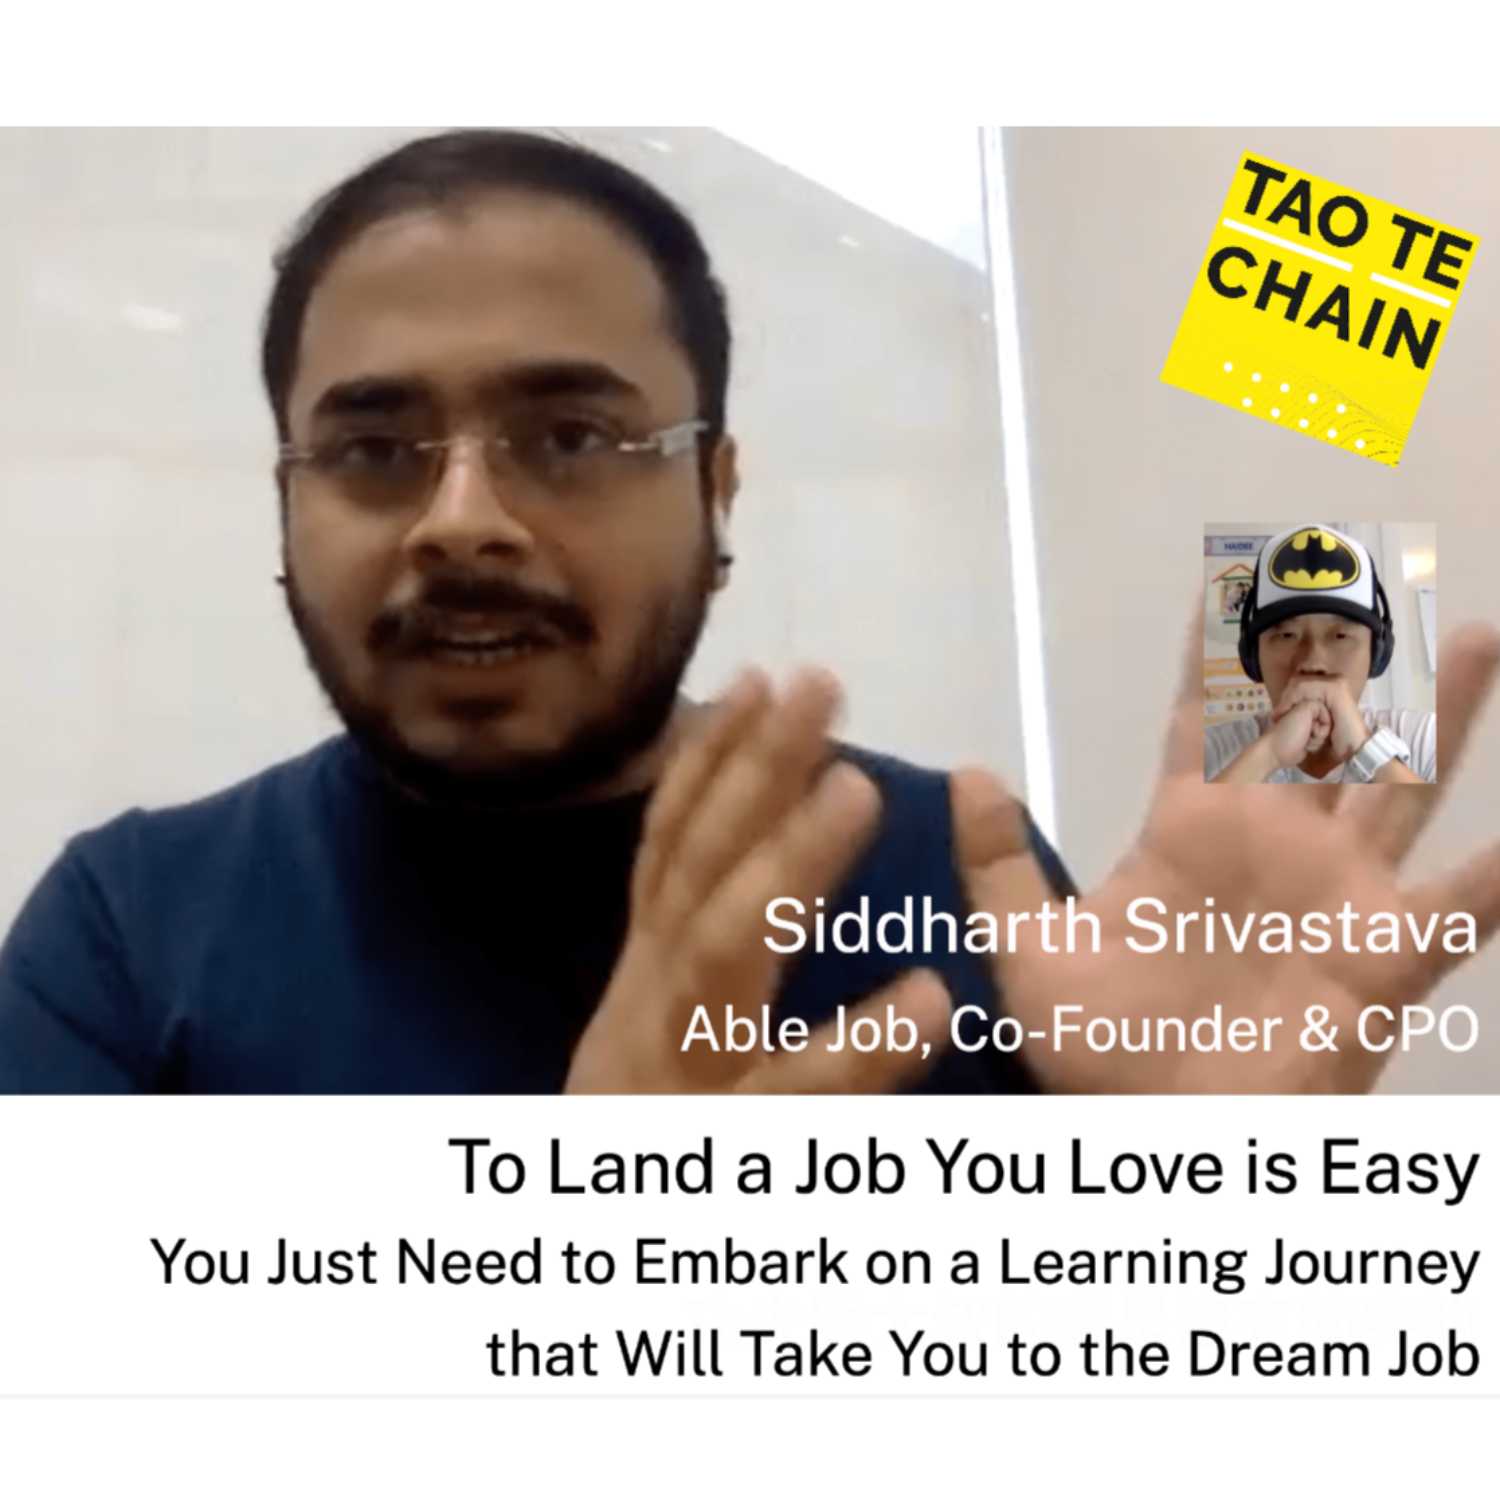 Siddharth Srivastava - To Land a Job You Love is Easy,  You Just Need to Embark on a Learning Journey that Will Take You to the Dream Job